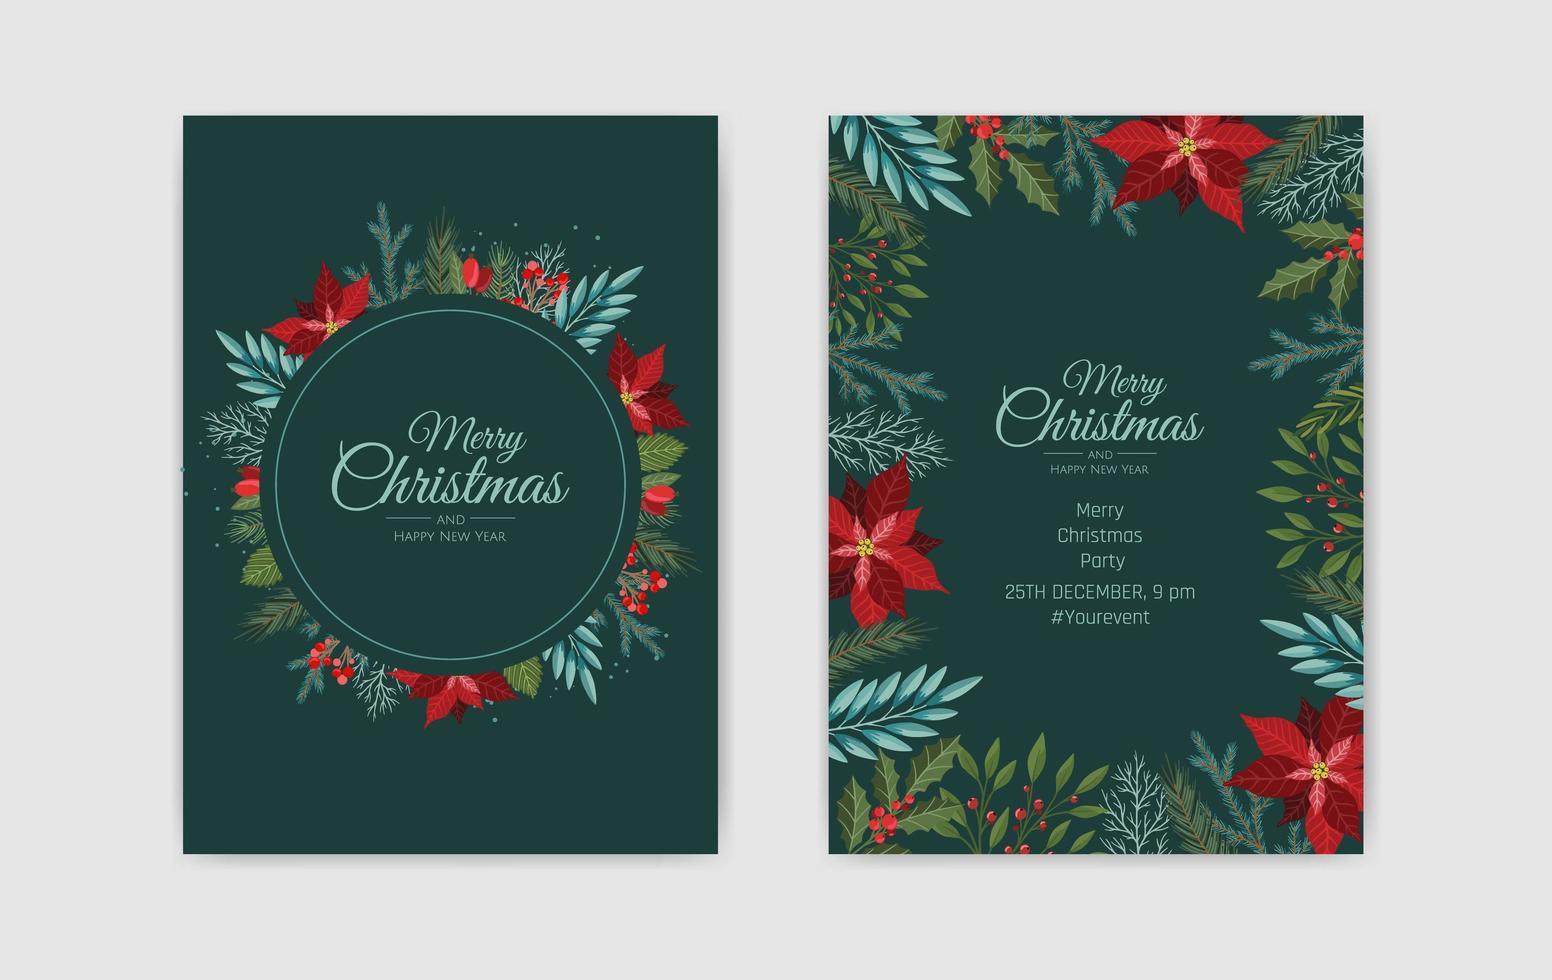 Merry Christmas greeting card with new years tree. Hand drawn design vector illustration.